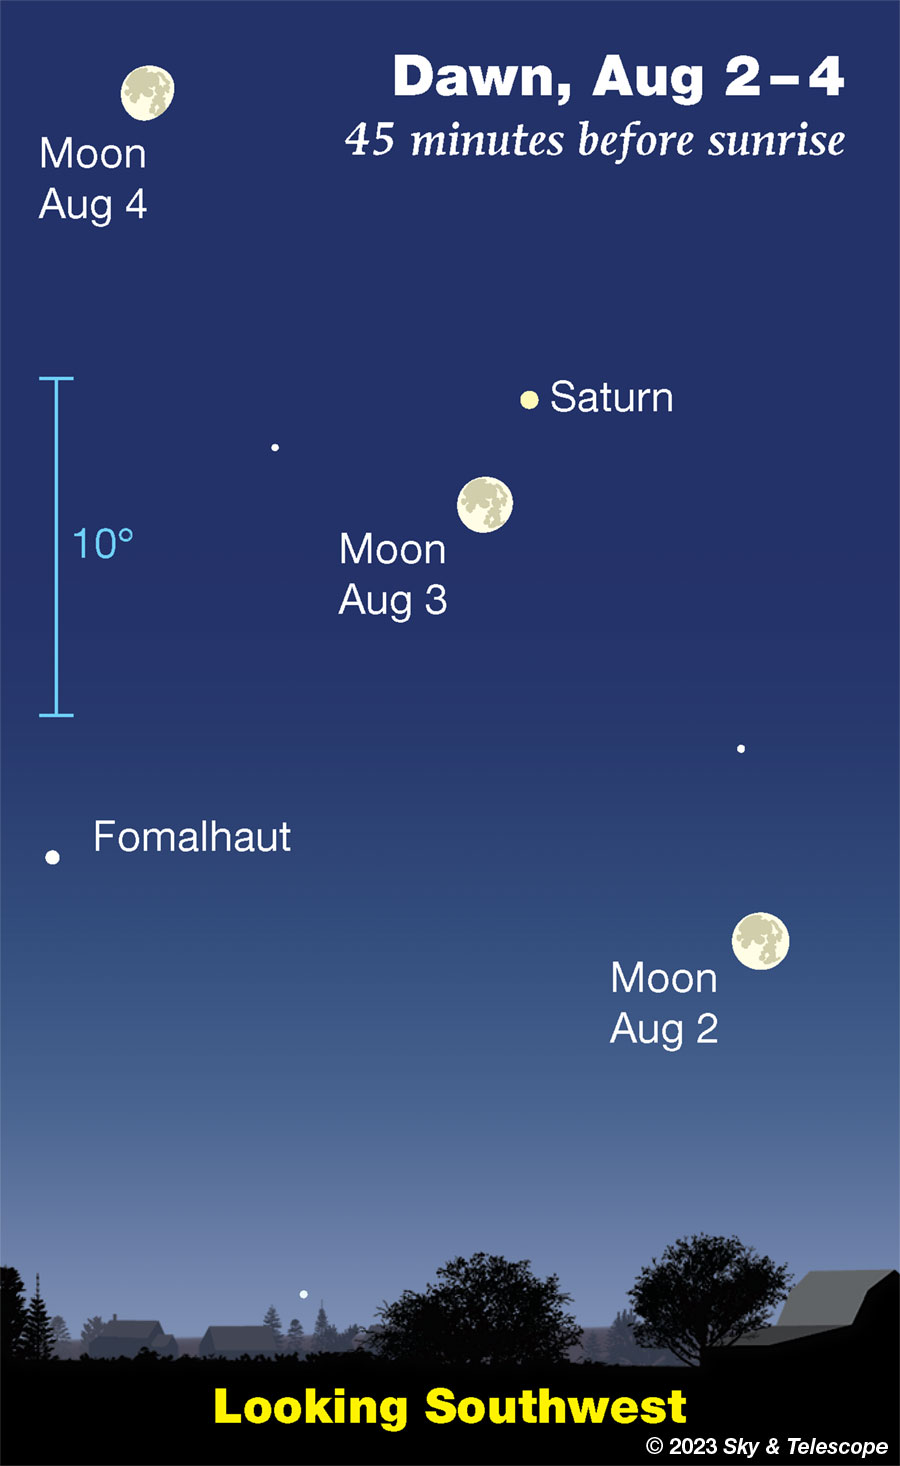 Moon and Saturn at dawn, August 2-4, 2023